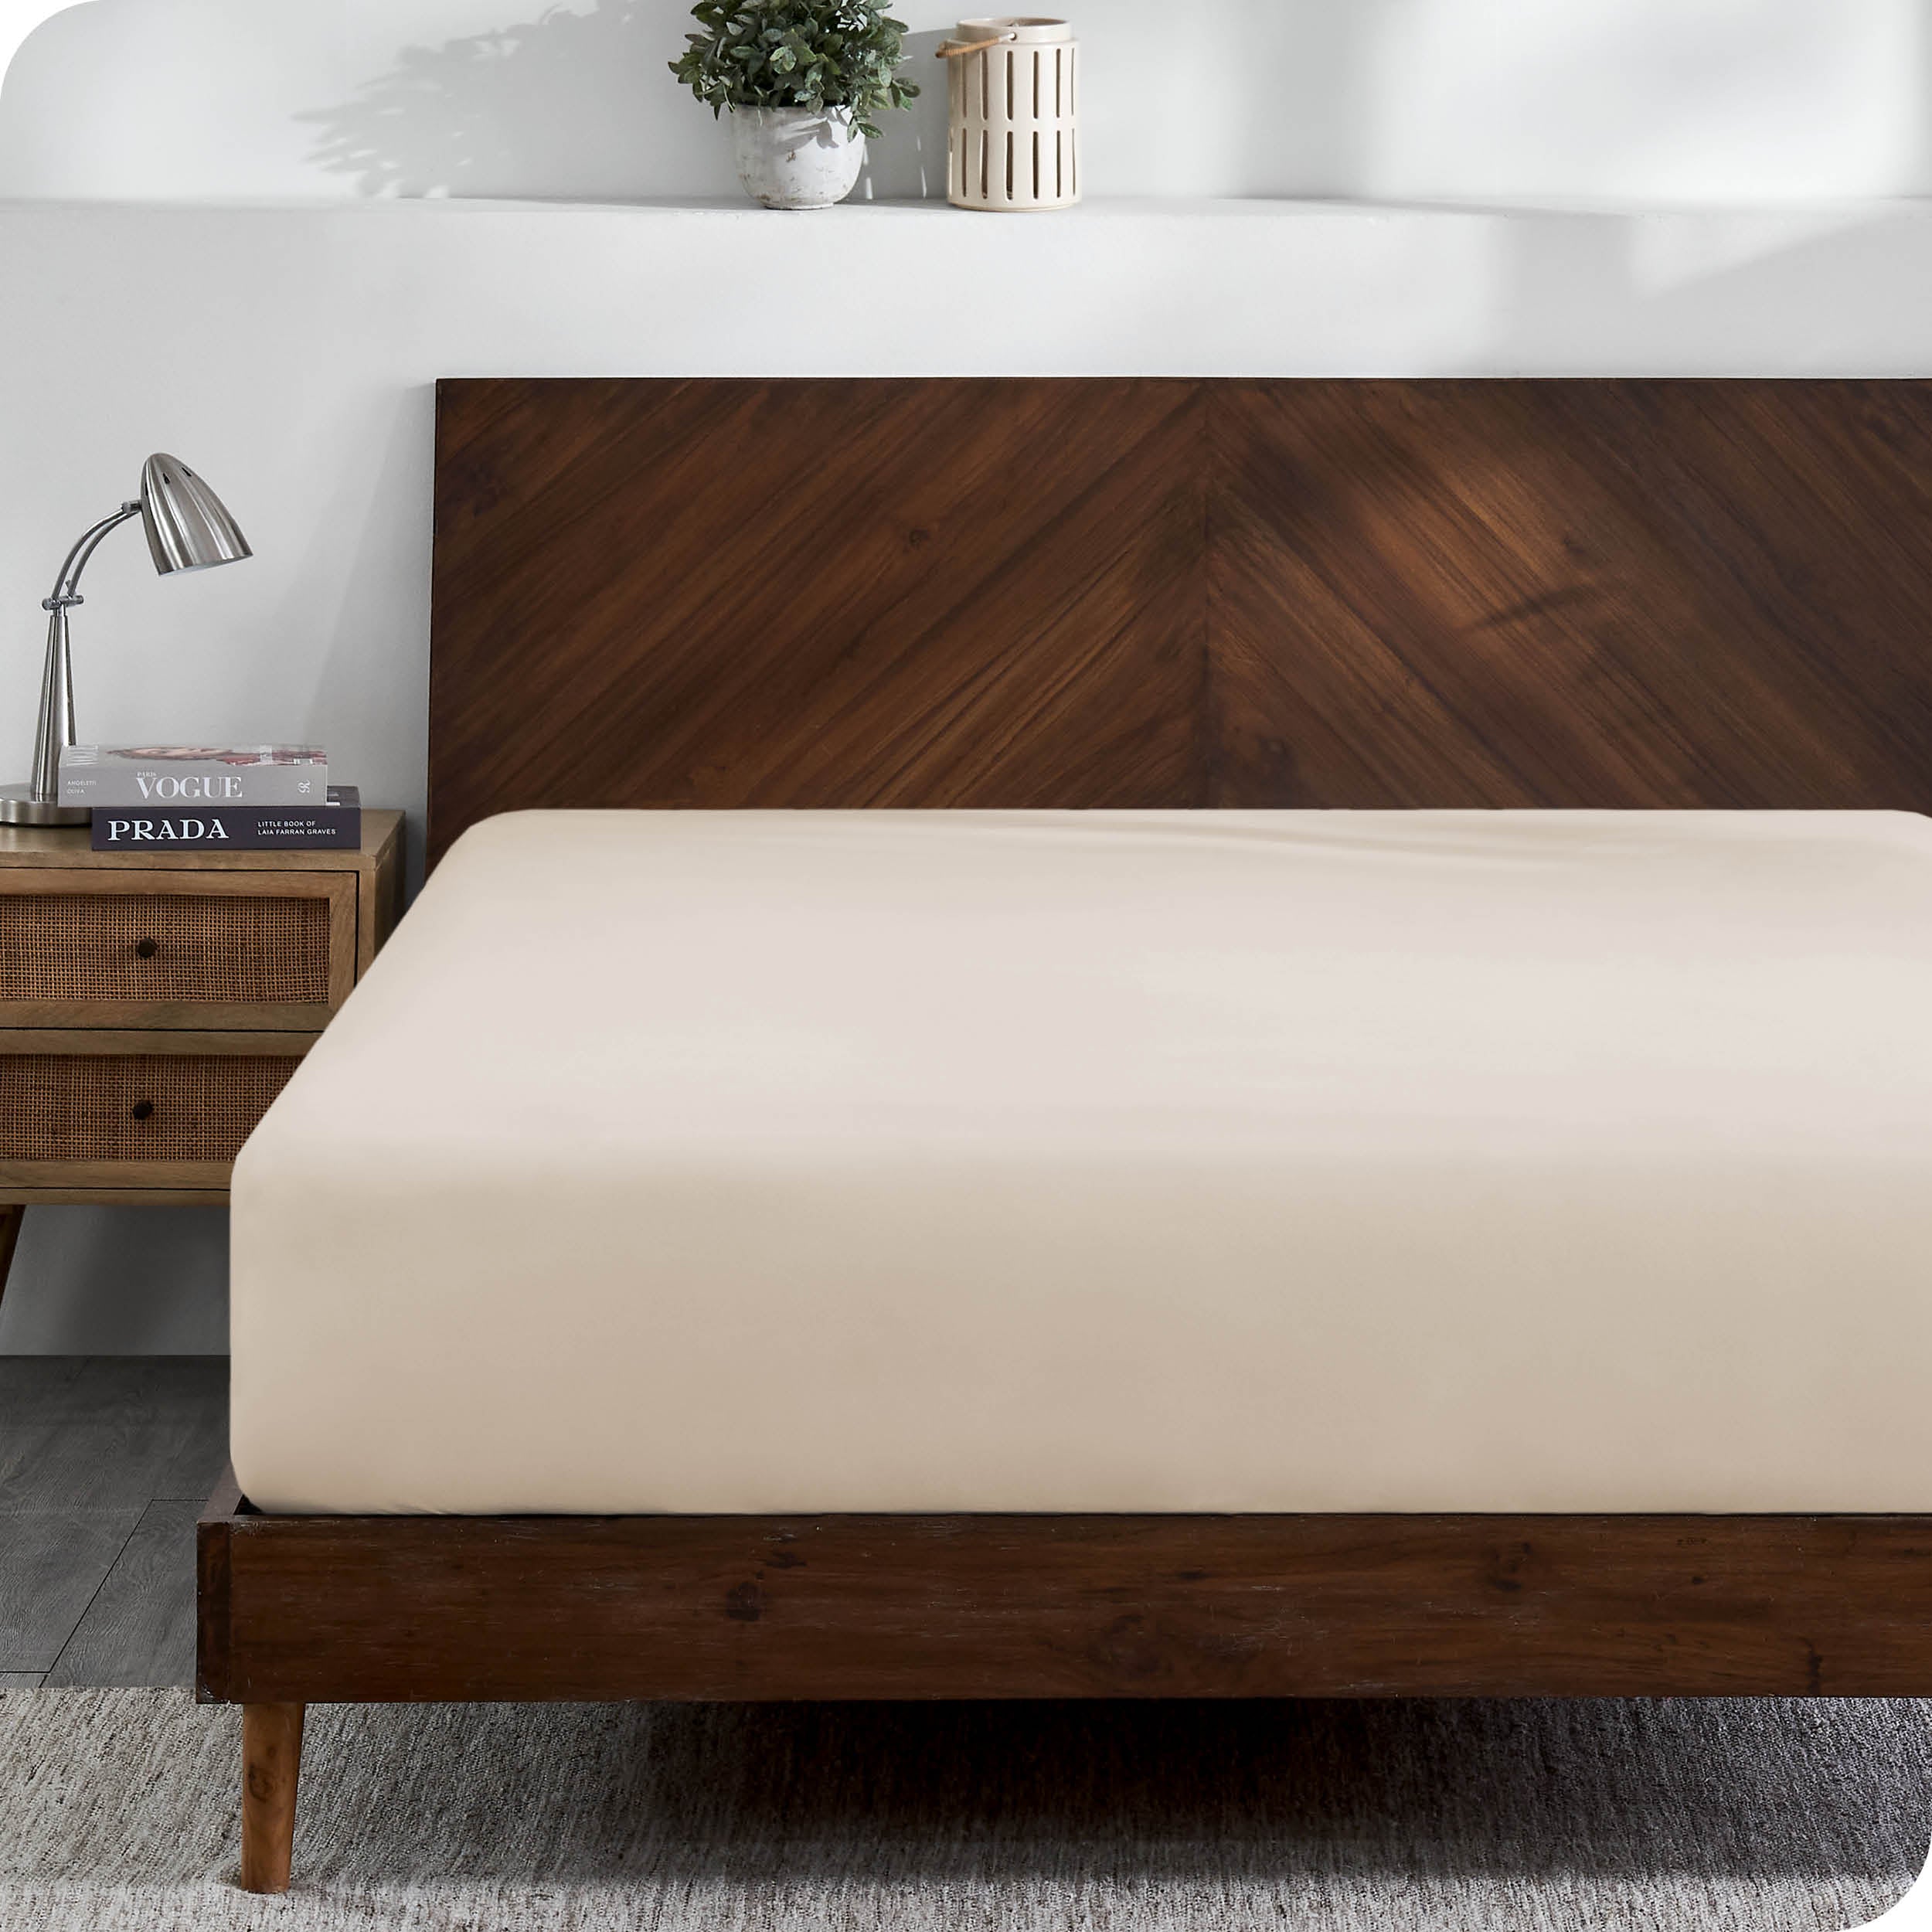 A modern wooden bed frame with a fitted sheet on the mattress